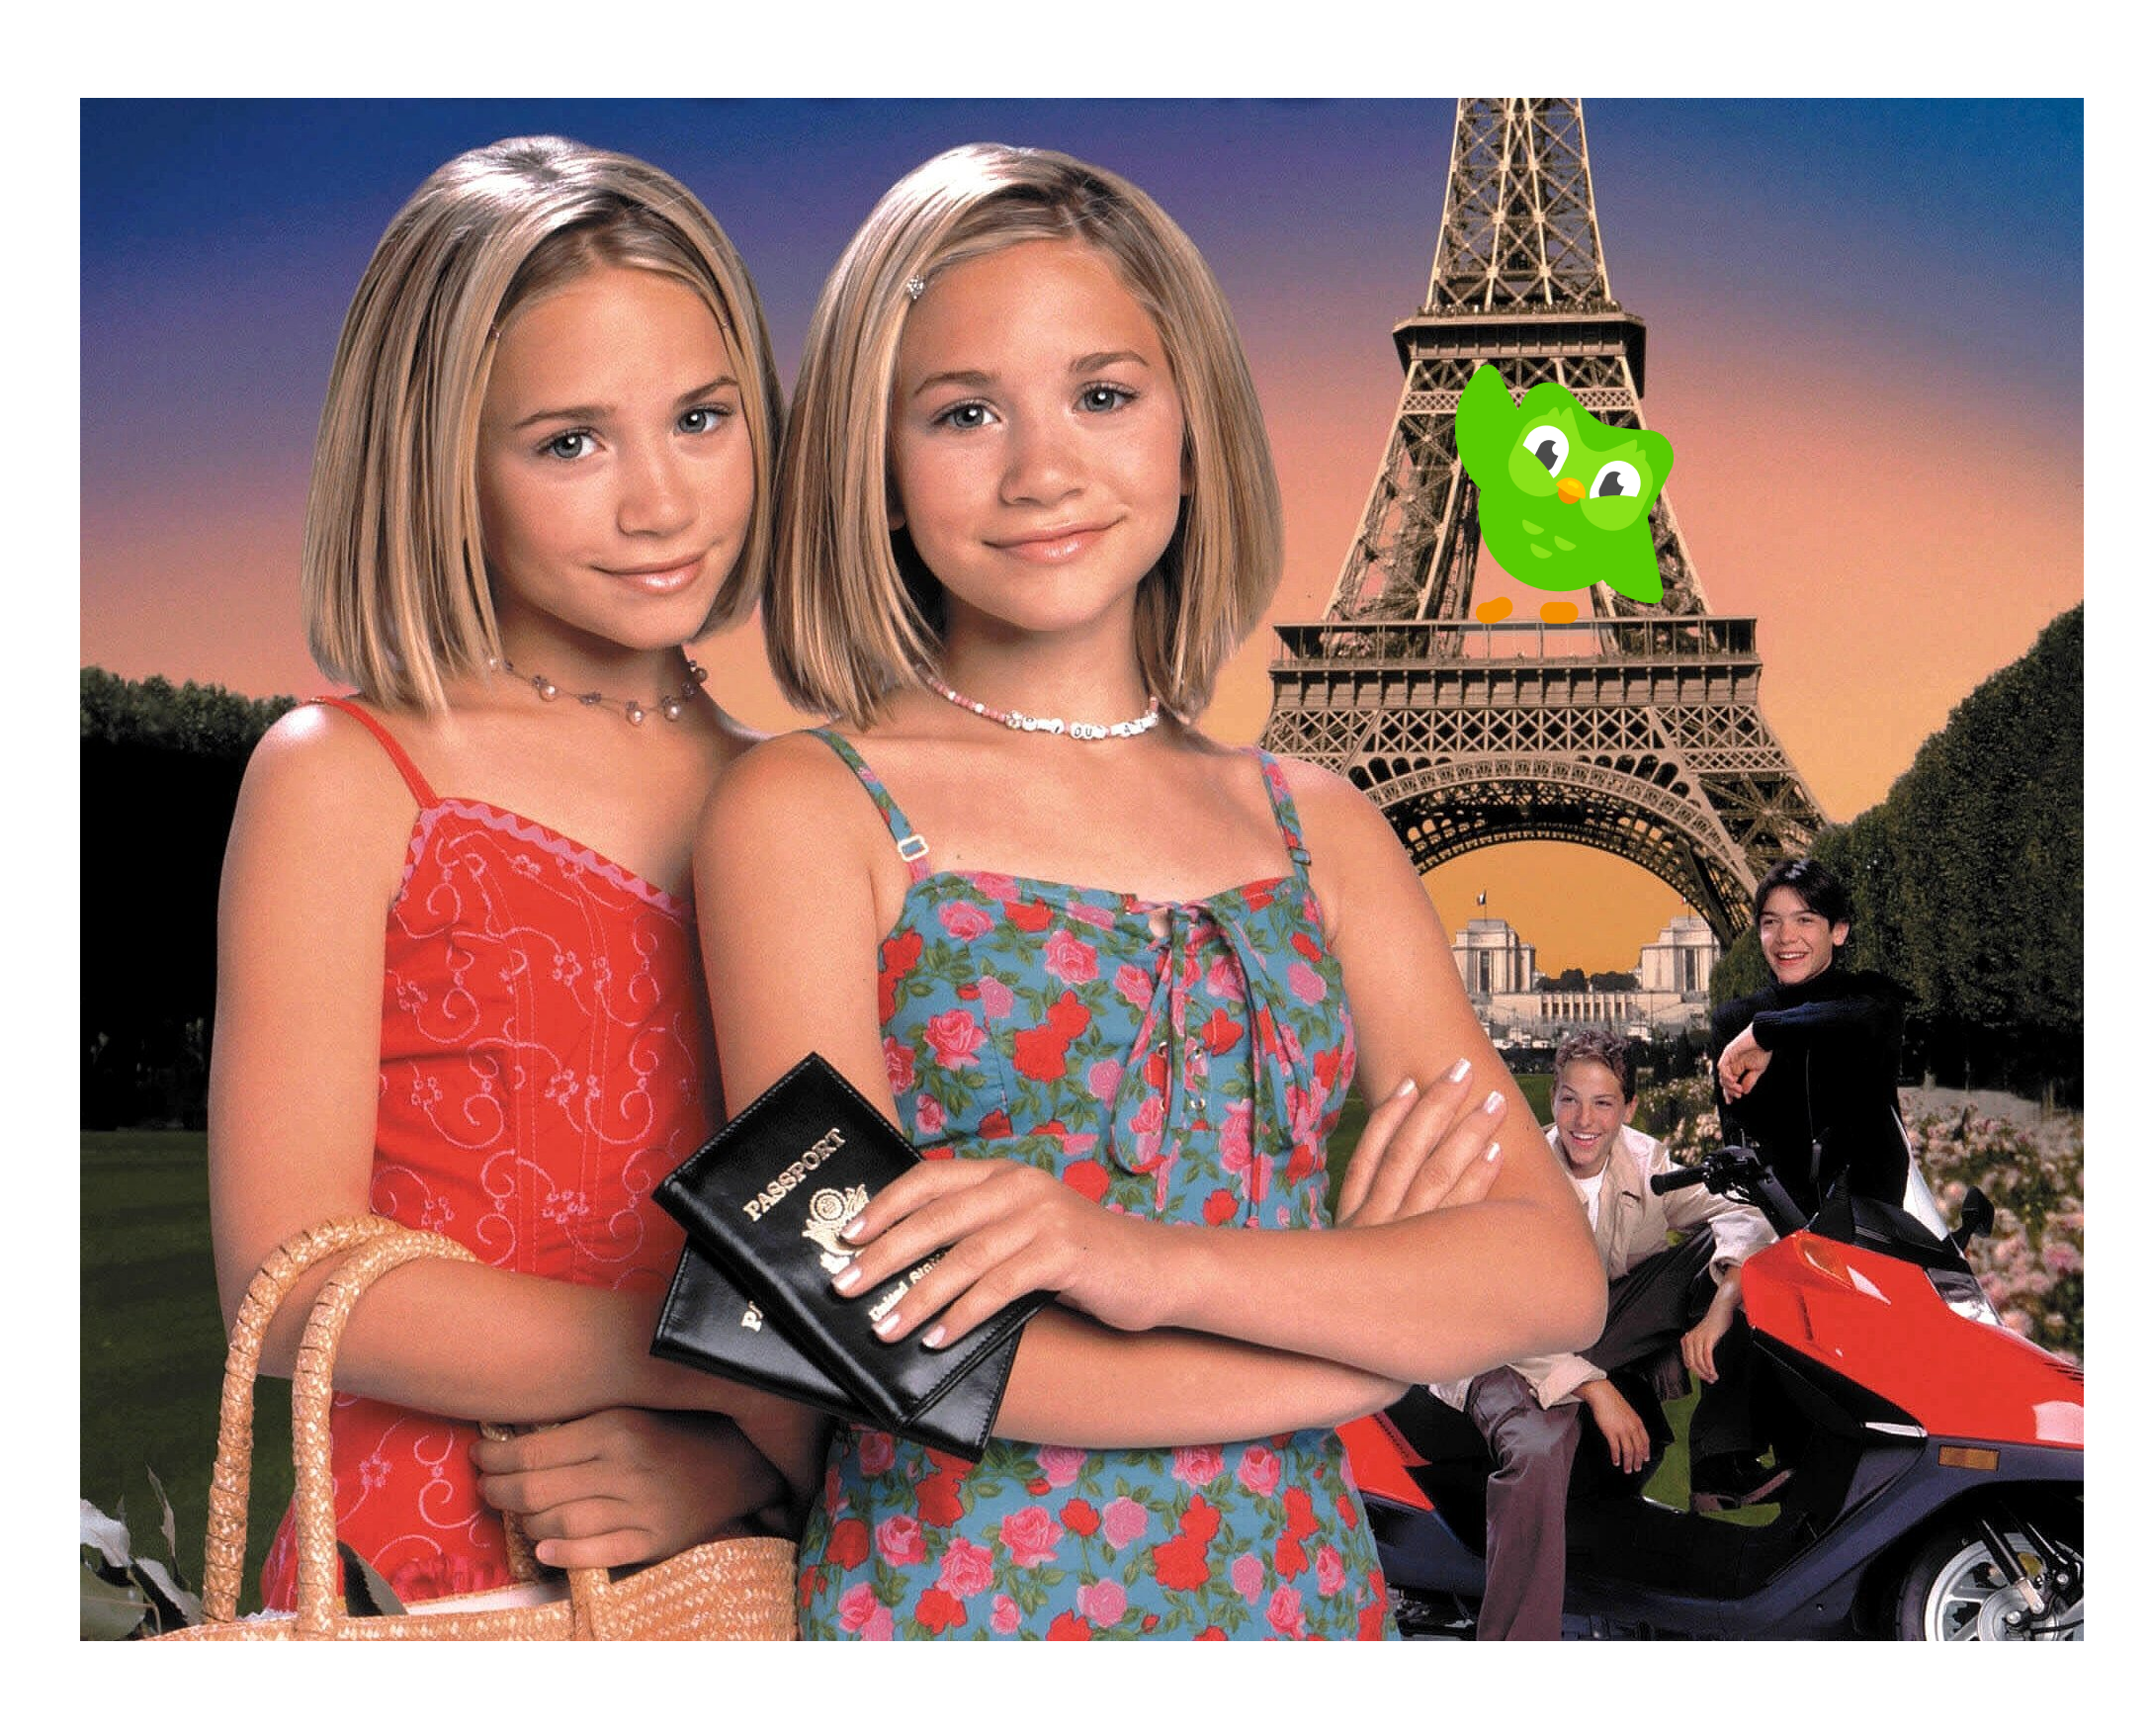 Image from the promotion for "Passport in Paris," with Mary Kate and Ashley Olsen standing in front of the Eiffel Tower, where the Duolingo owl is photoshopped and waving to them